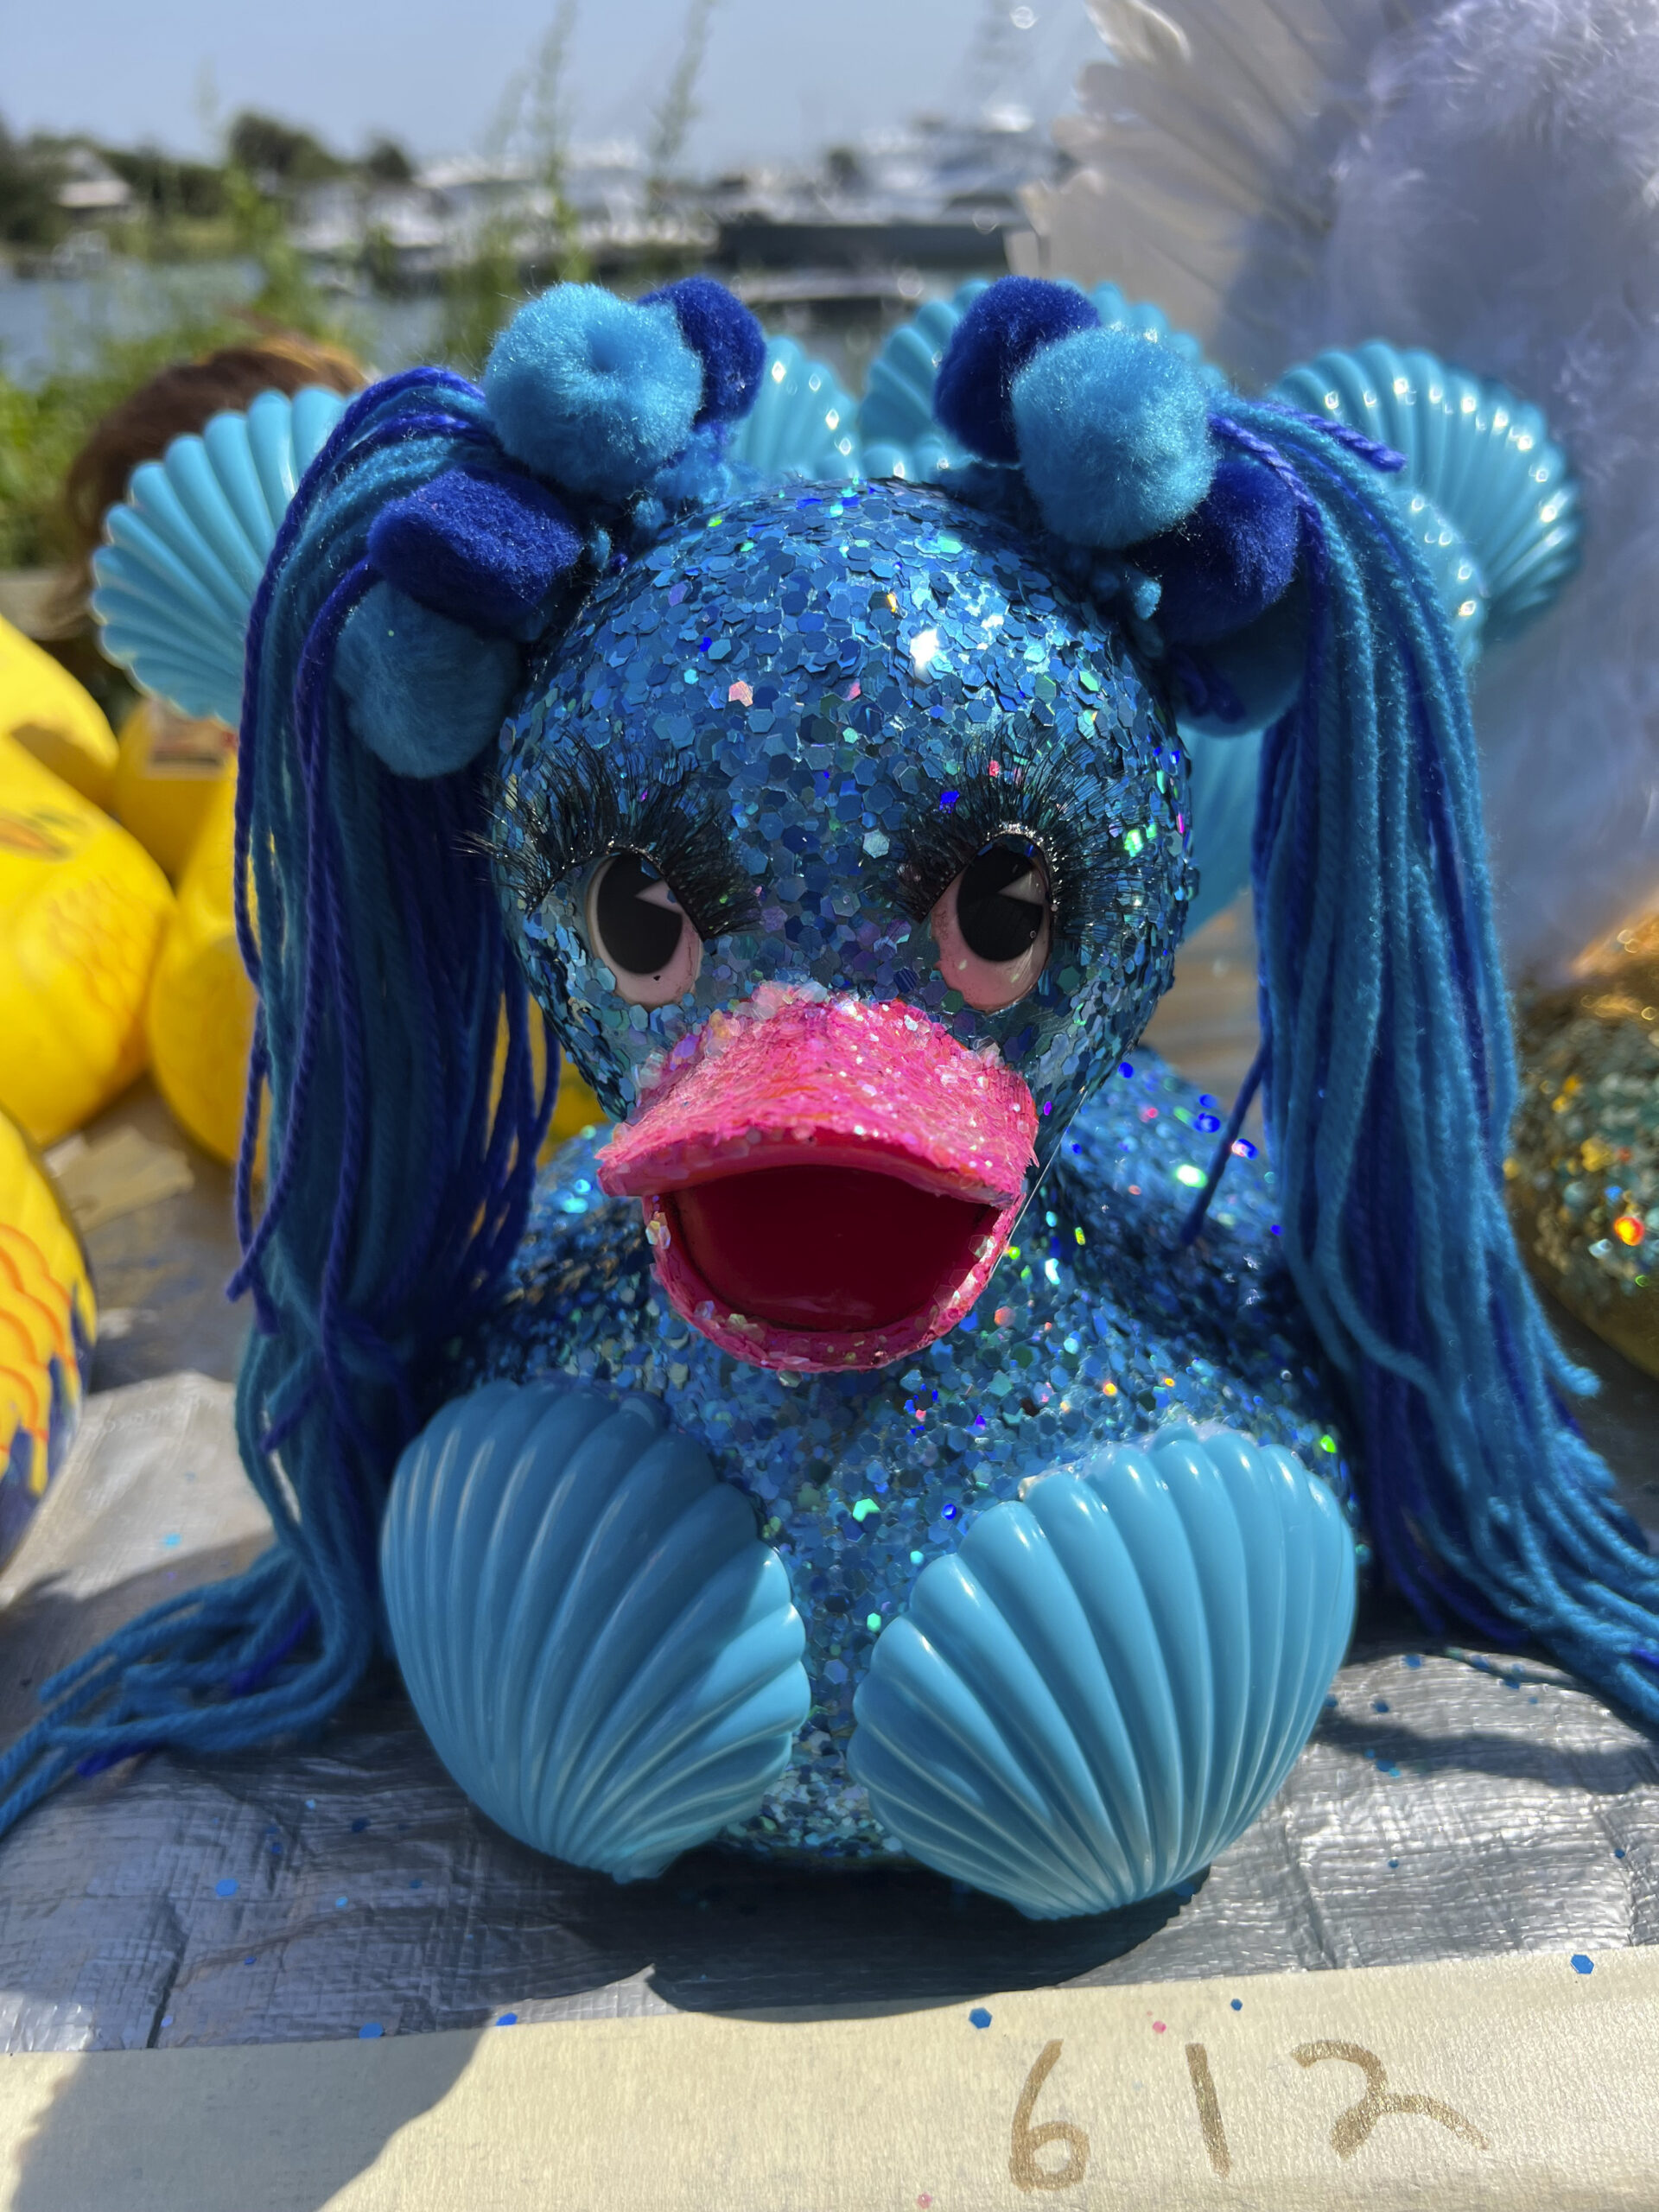 A decorated duck.